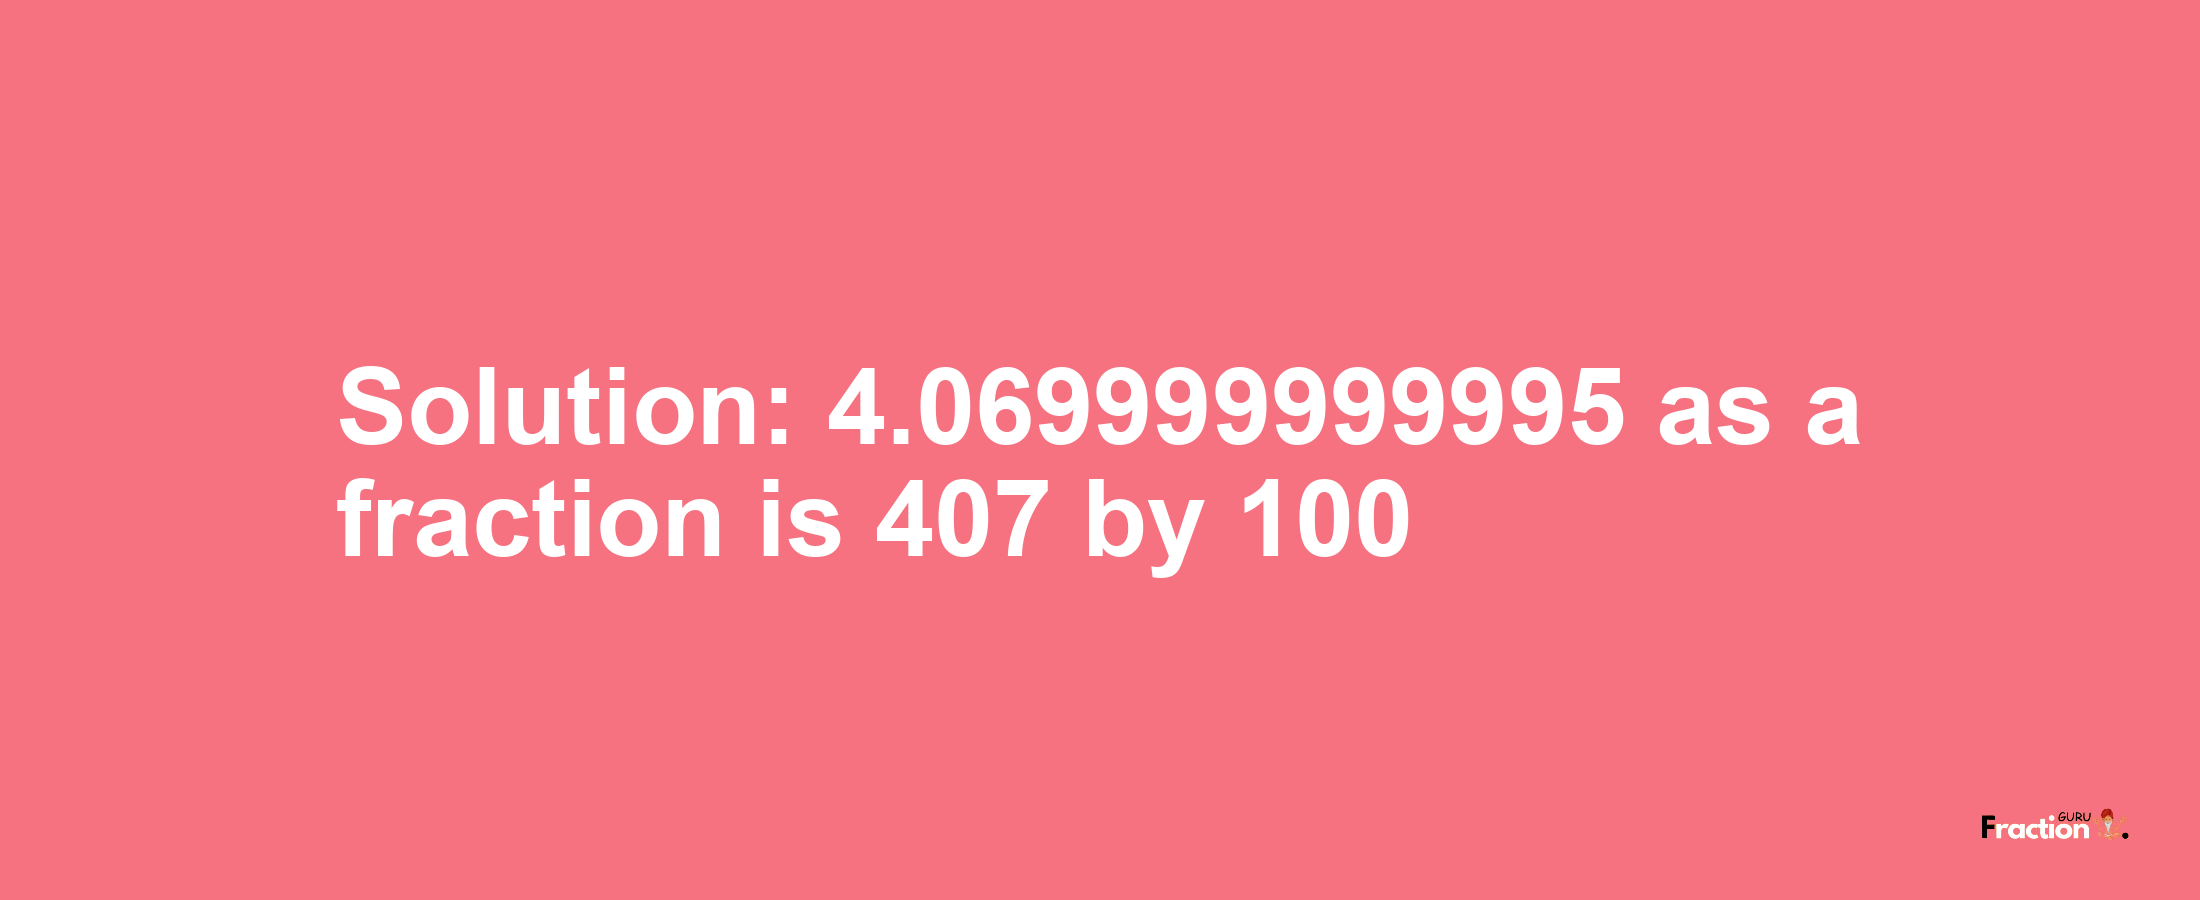 Solution:4.069999999995 as a fraction is 407/100